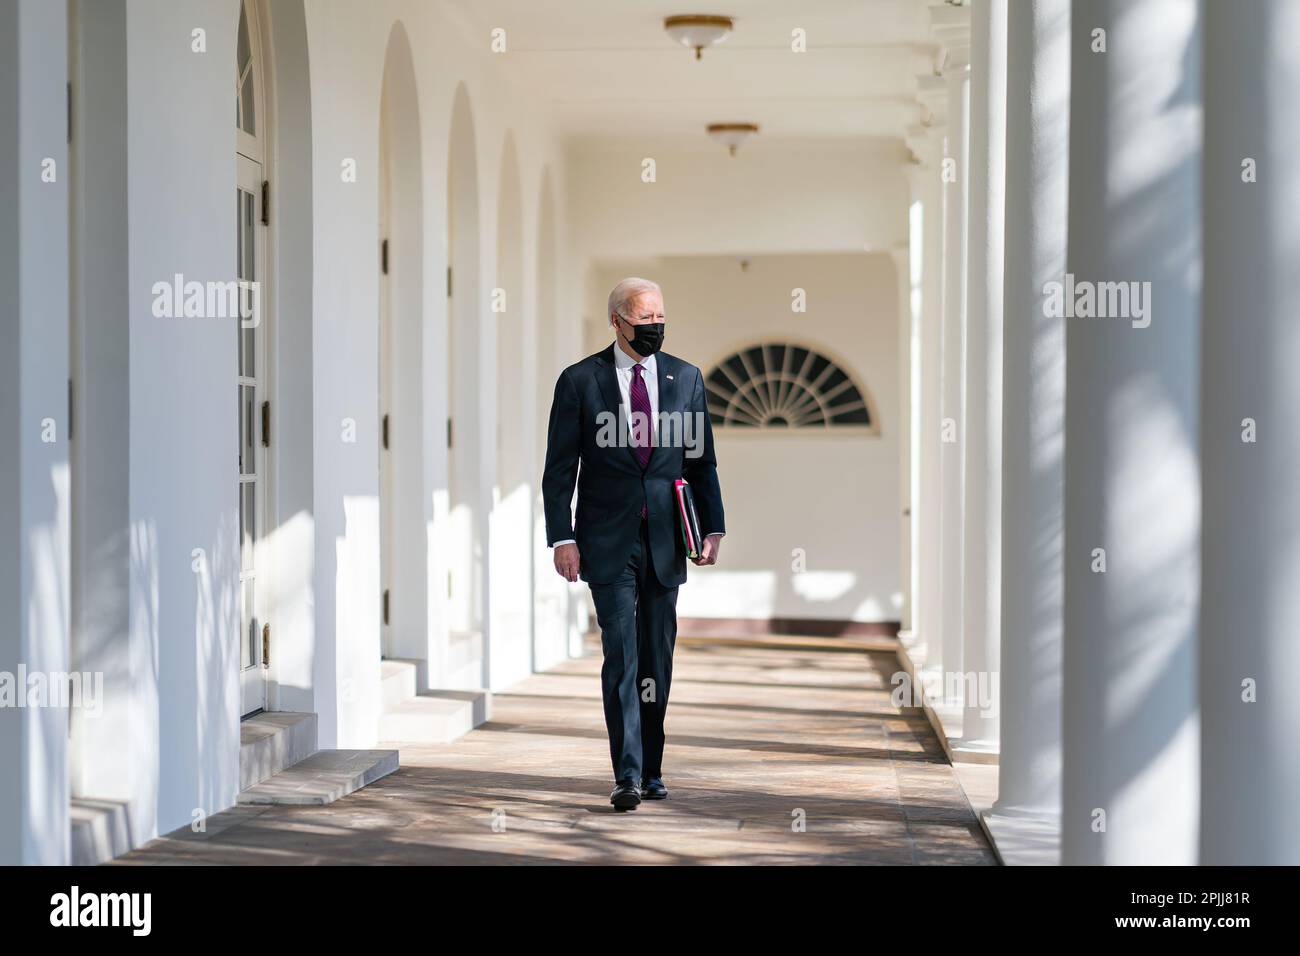 President Joe Biden walks along the Colonnade of the White House Tuesday, Feb. 23, 2021, to the Oval Office. (Official White House Photo by Adam Schultz) Stock Photo